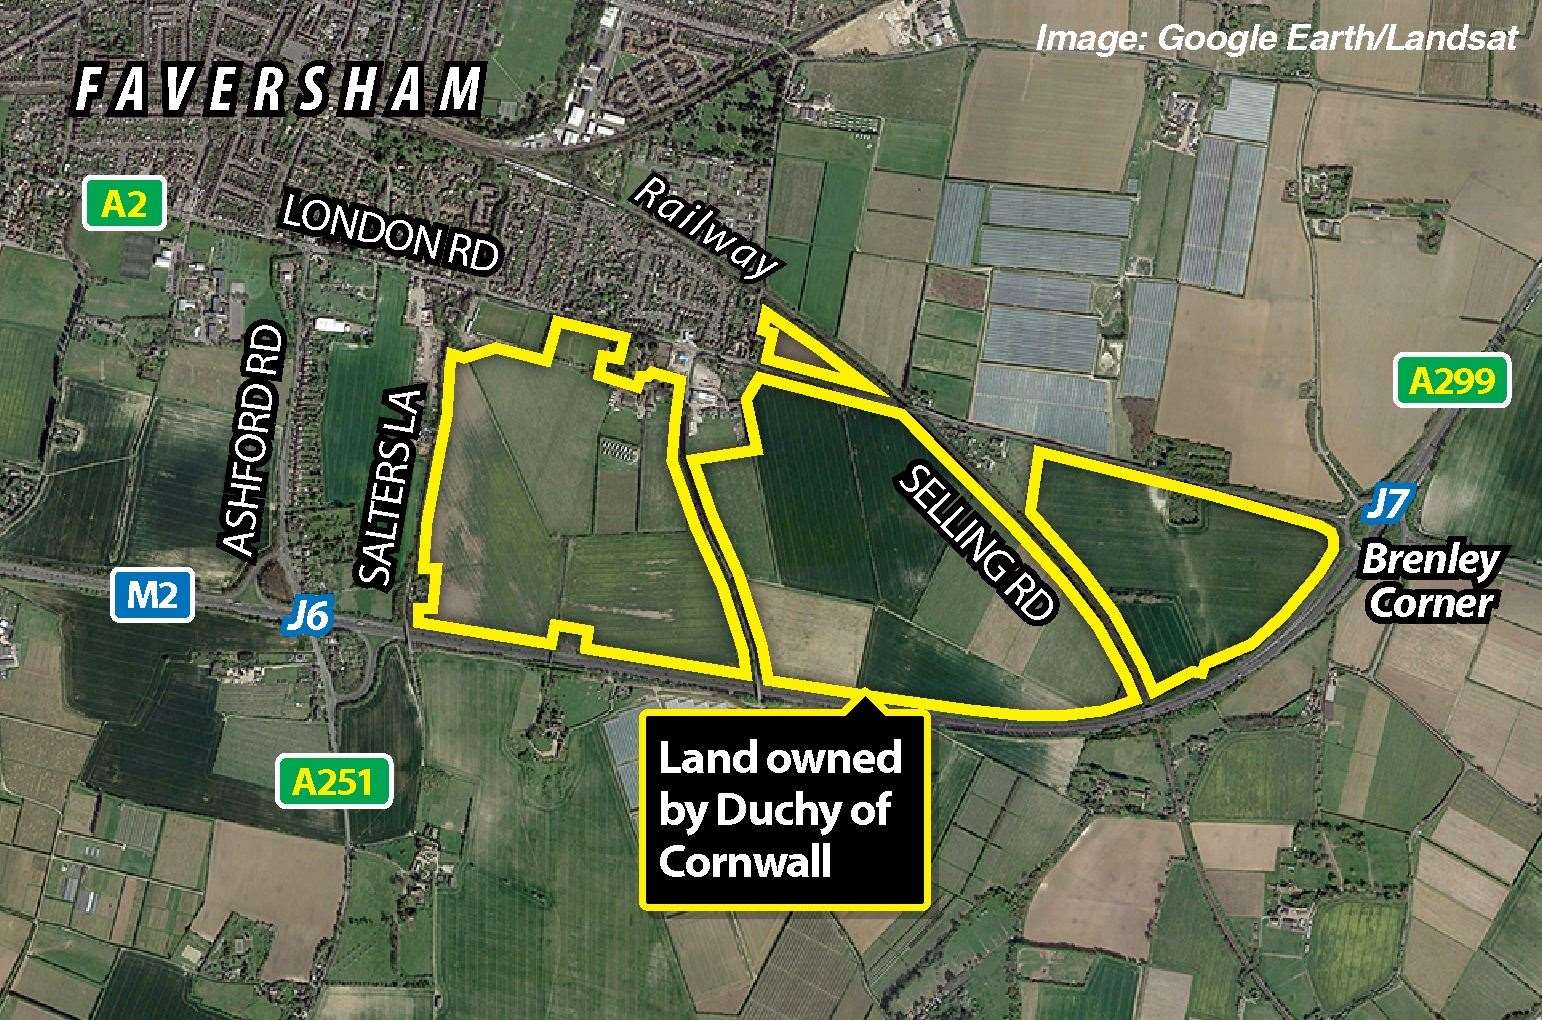 Land owned by the Duchy of Cornwall on the outskirts of Faversham. (60079378)